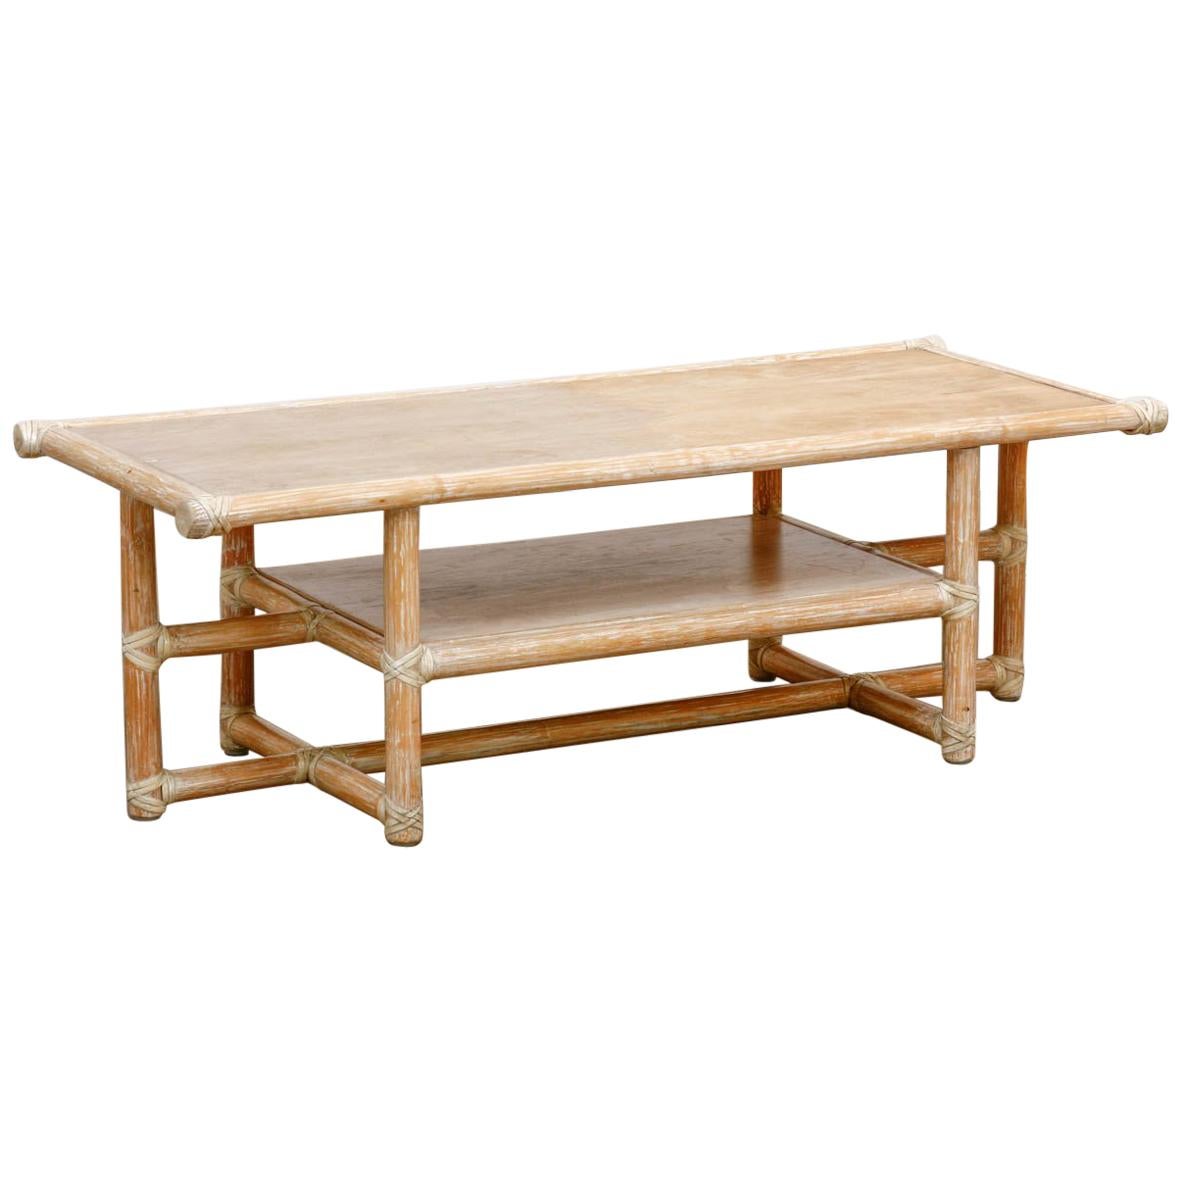 McGuire Cerused Bamboo and Wood Coffee Table